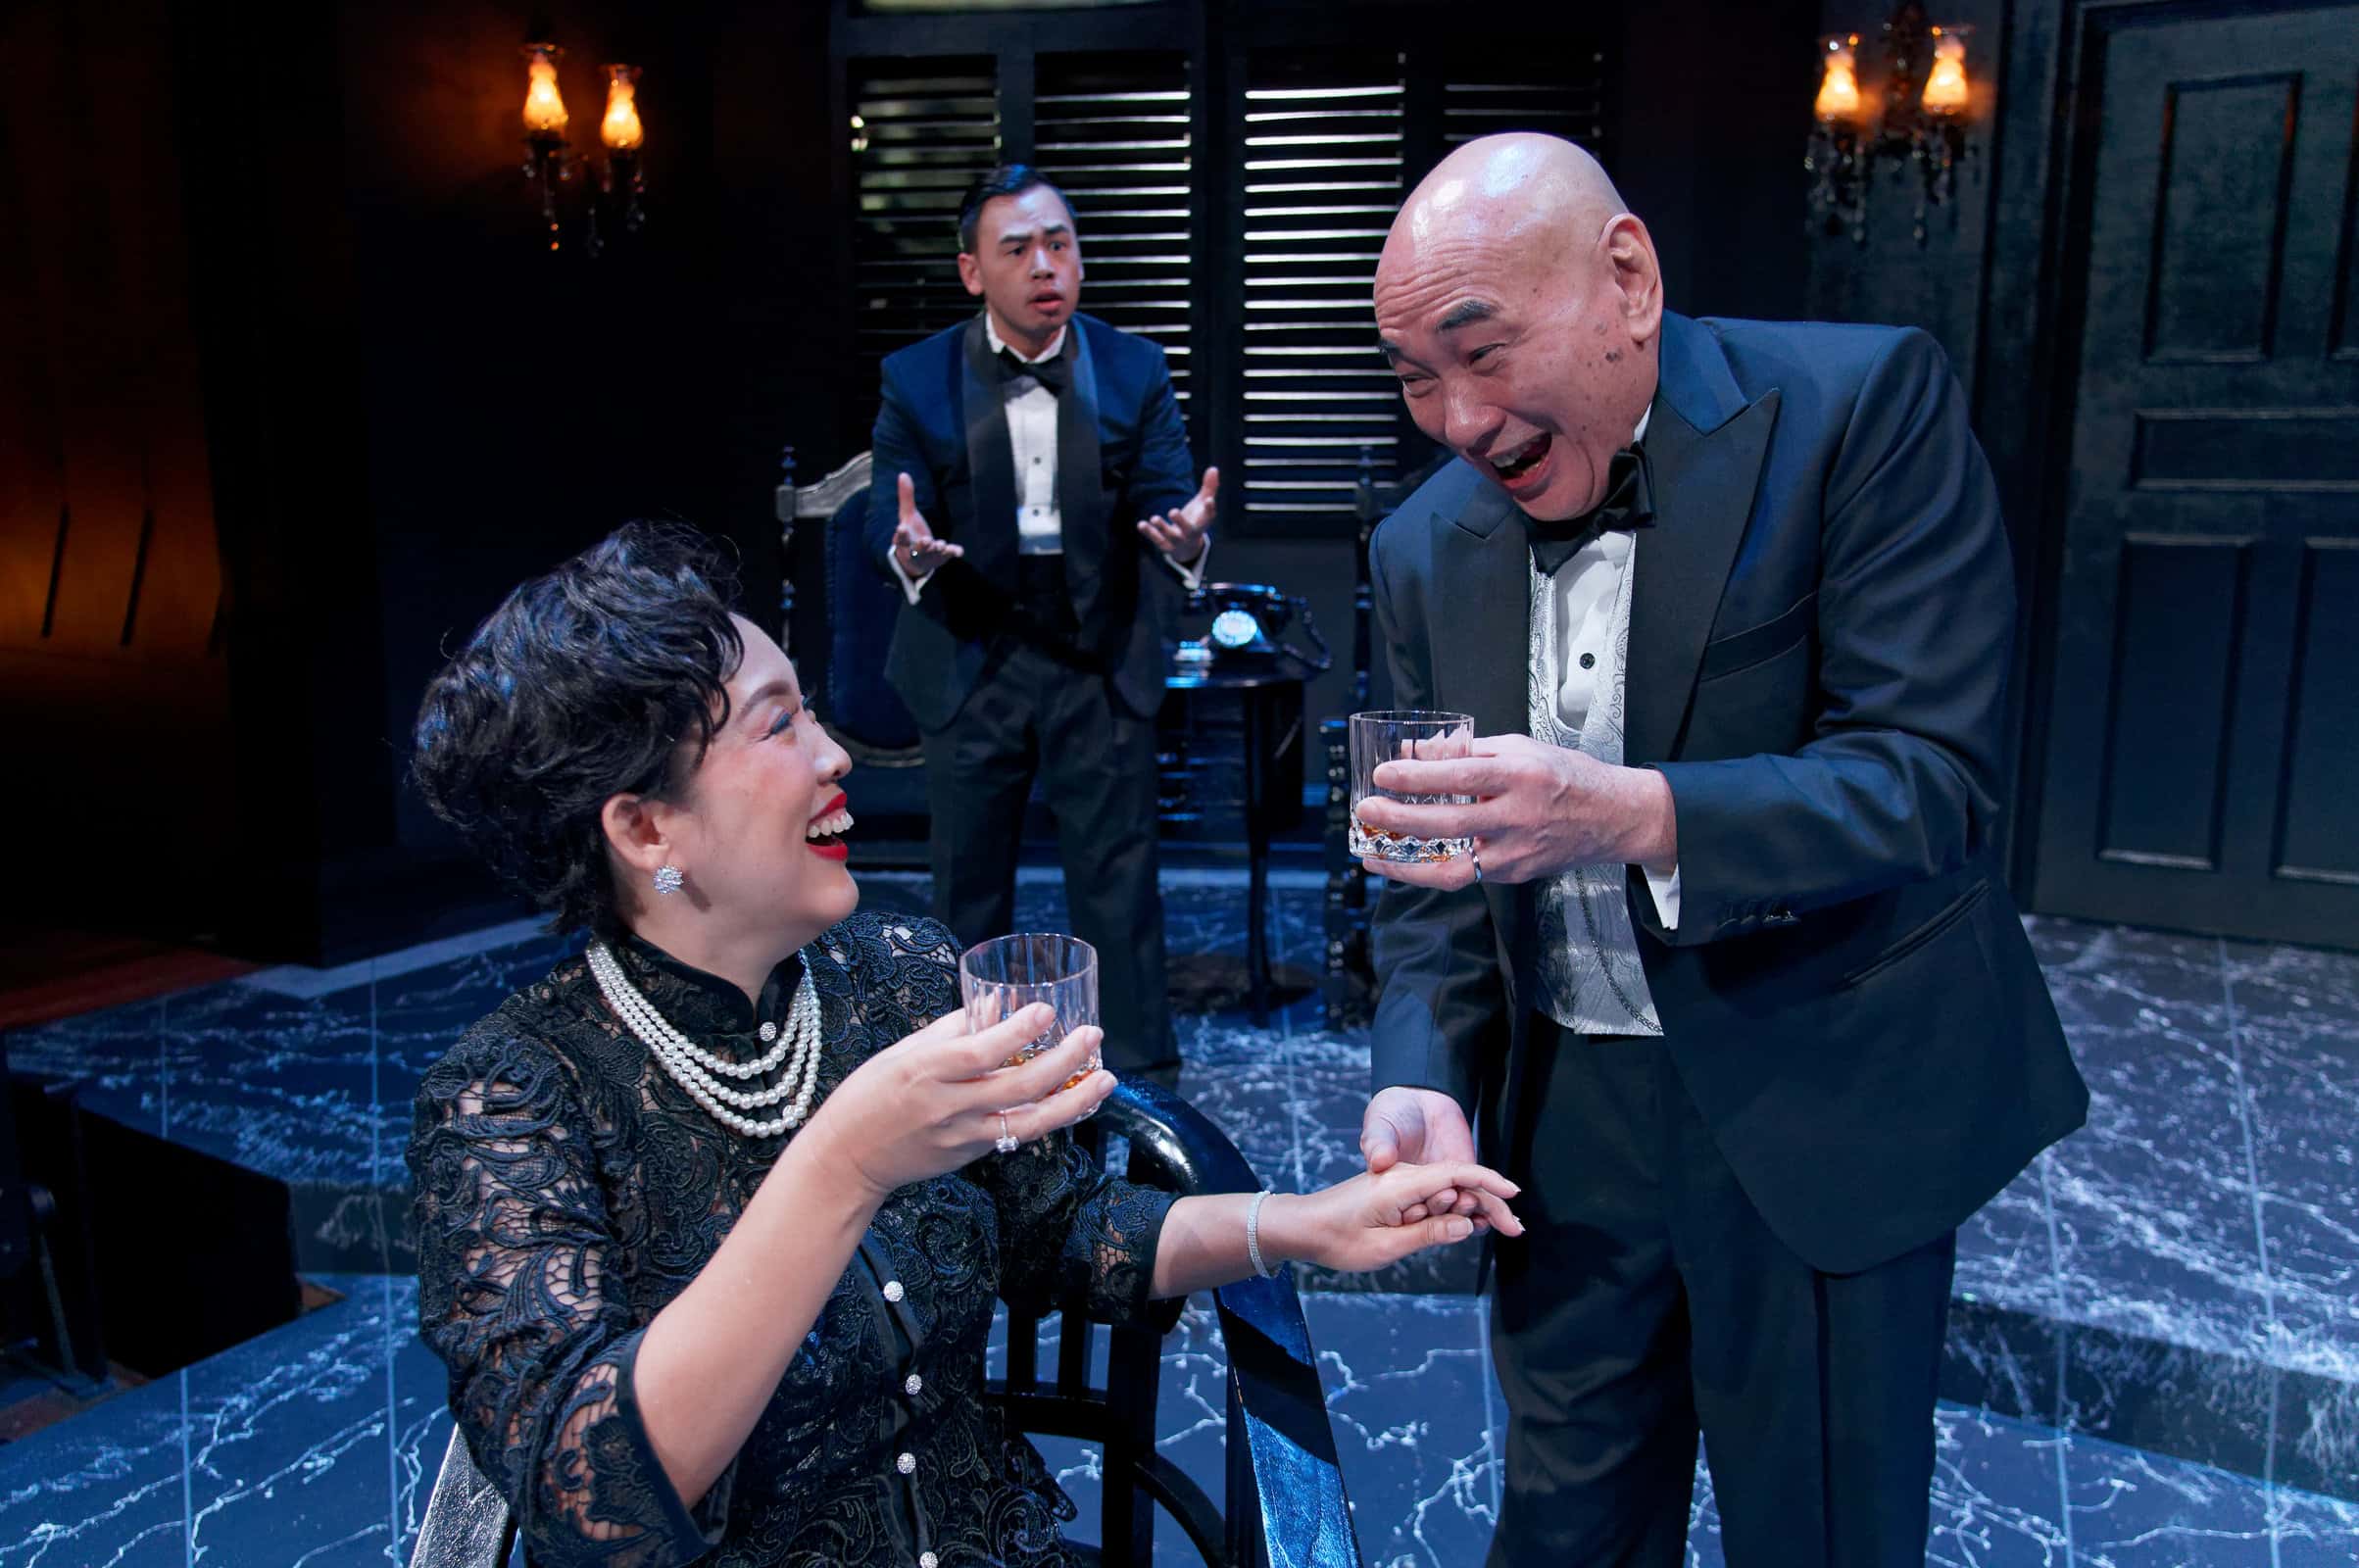 Serene Chen as Sybil Ling and Lim Kay Siu as Arthur Ling having a cheerful conversation over a drink as Dennis Sofian as Eric Ling look at them with a troubled look in the background